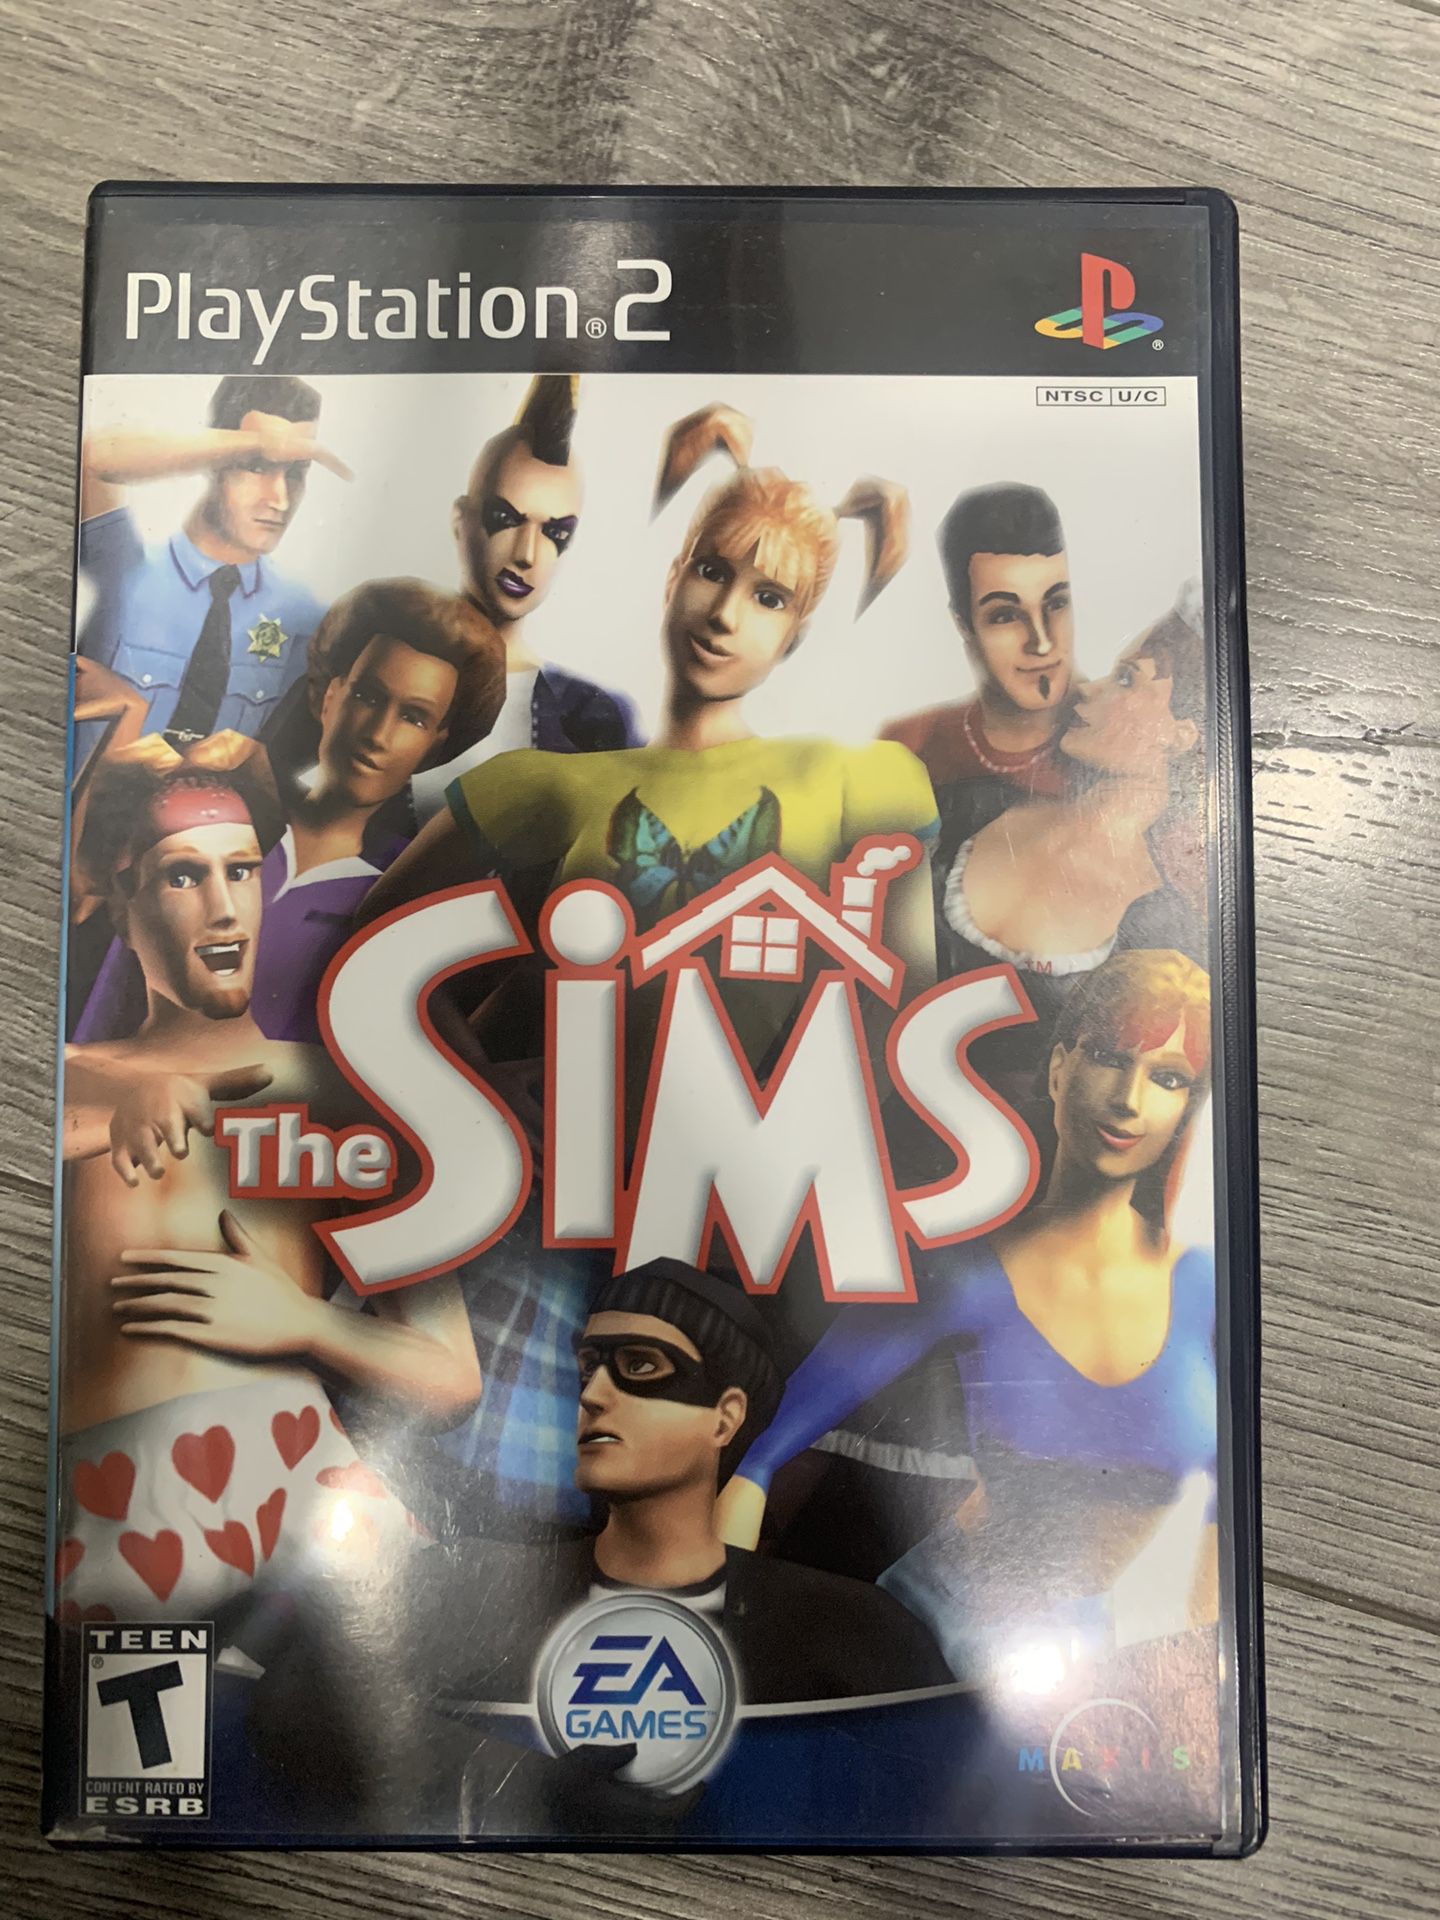 The Sims For PS2